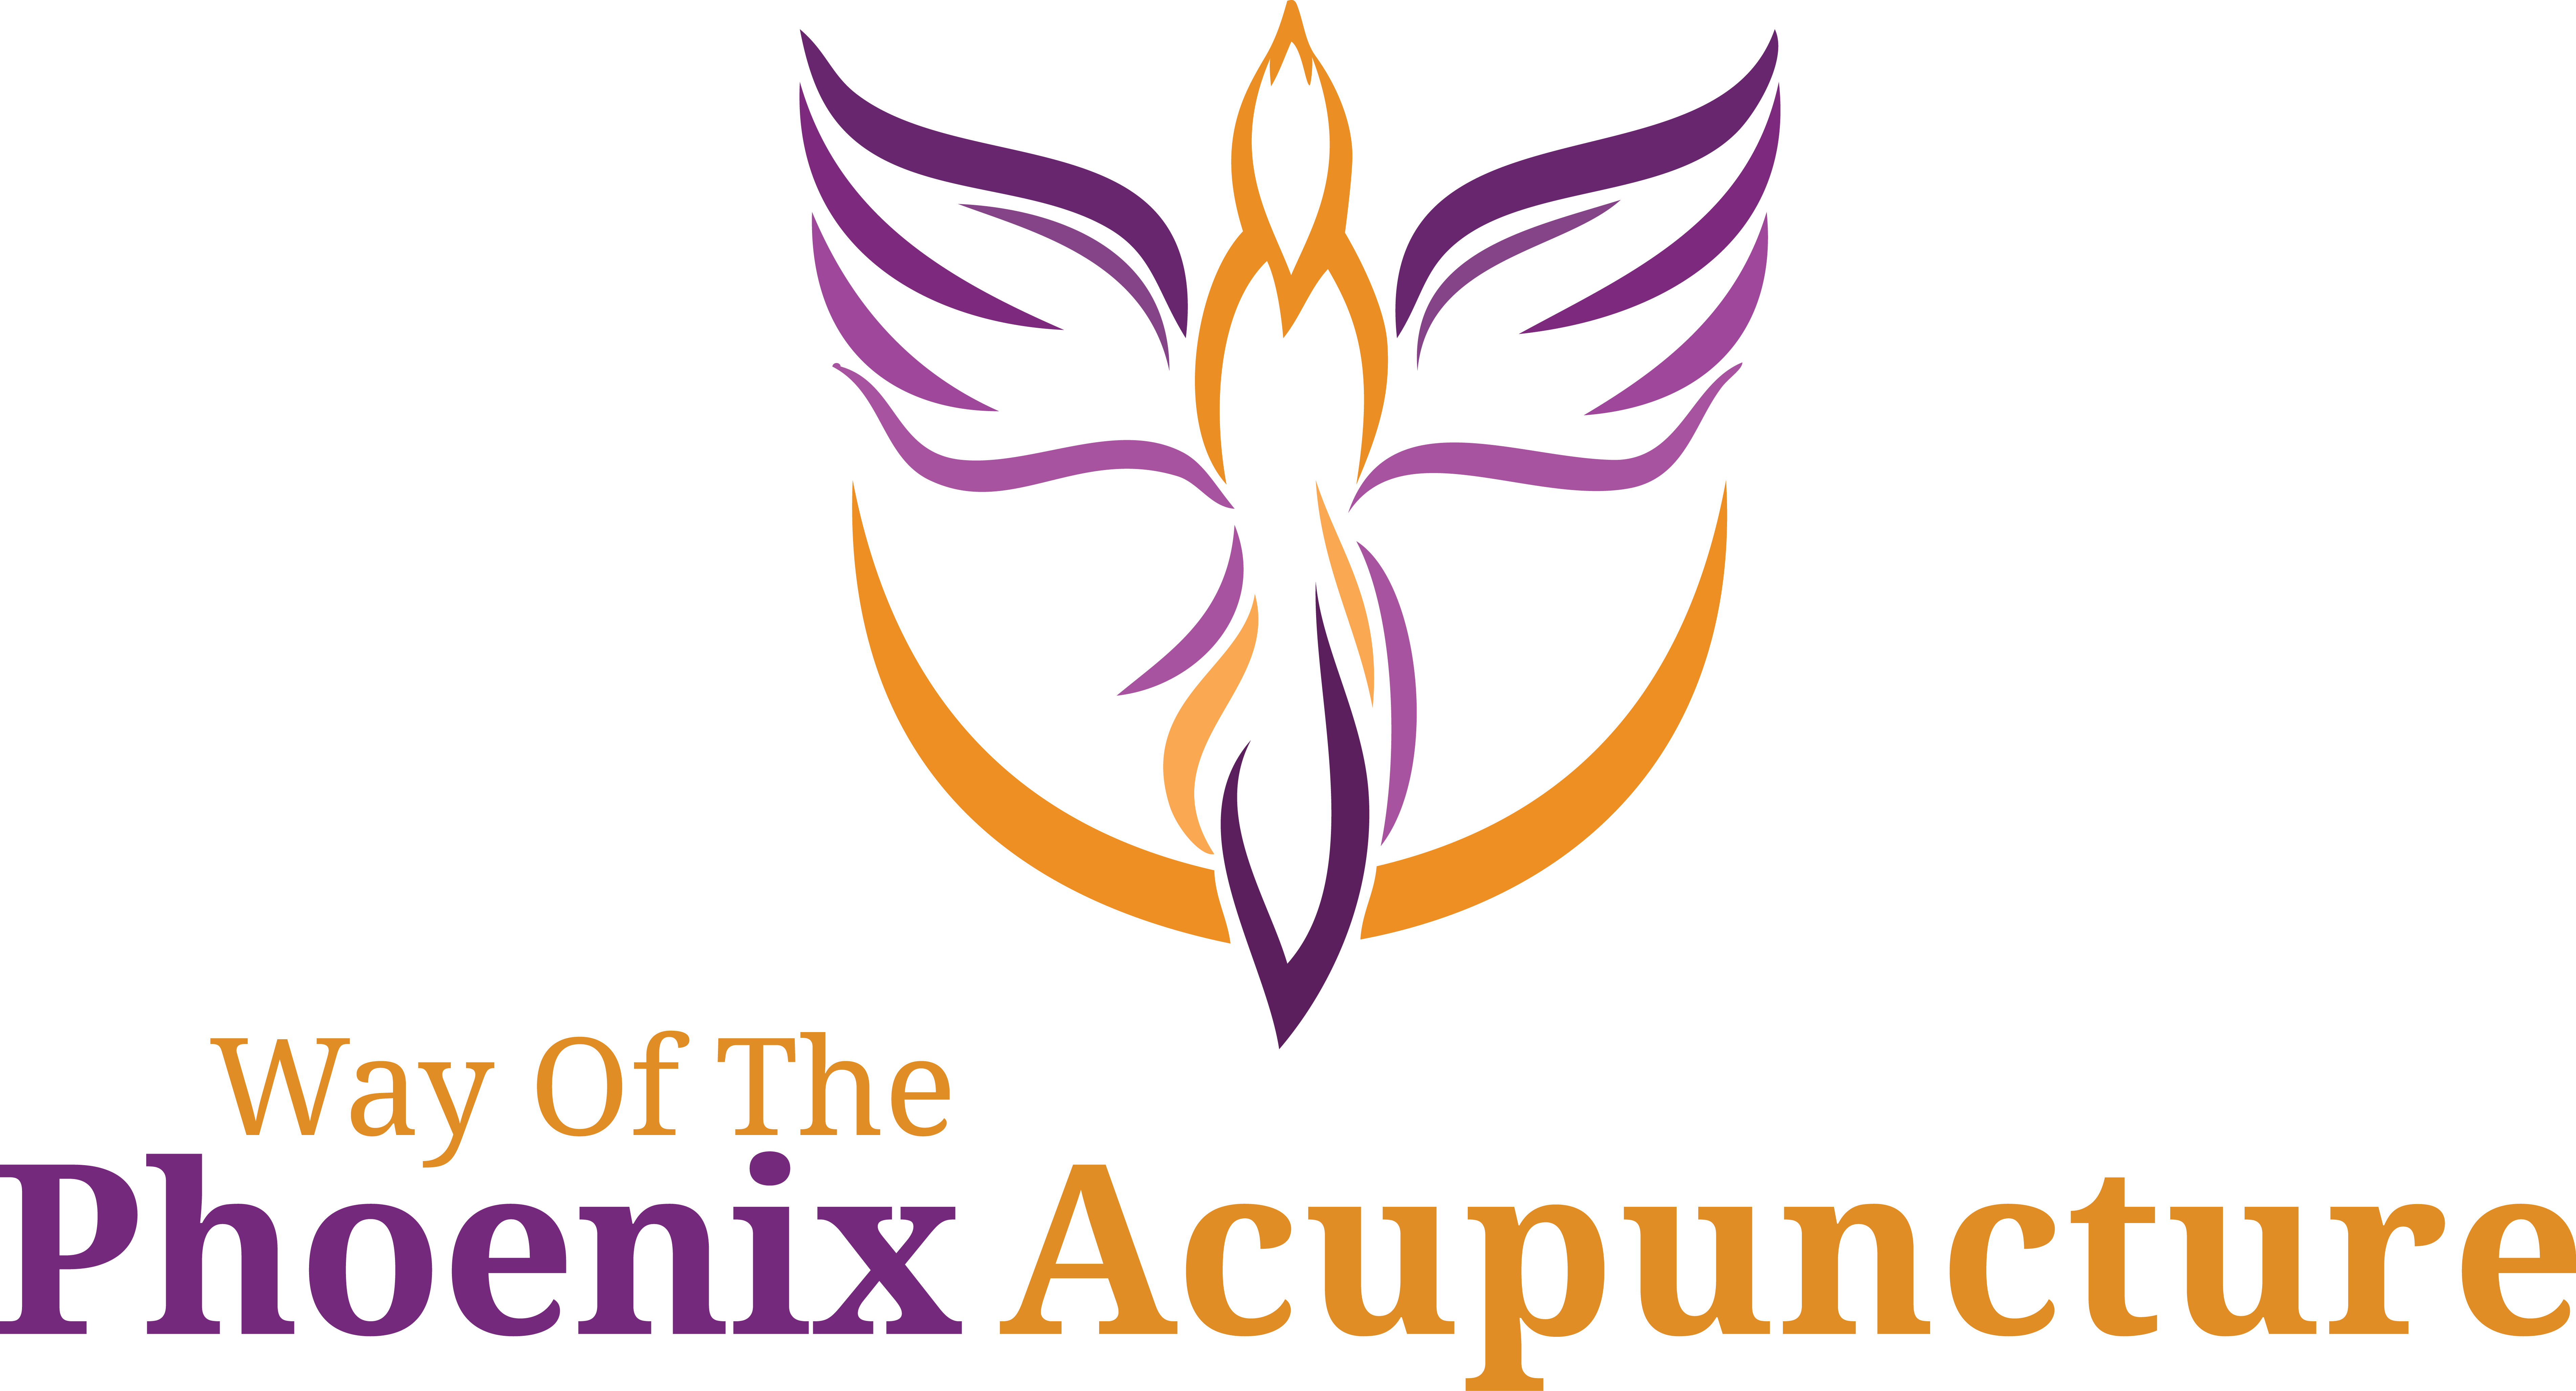 Way Of The Phoenix Acupuncture